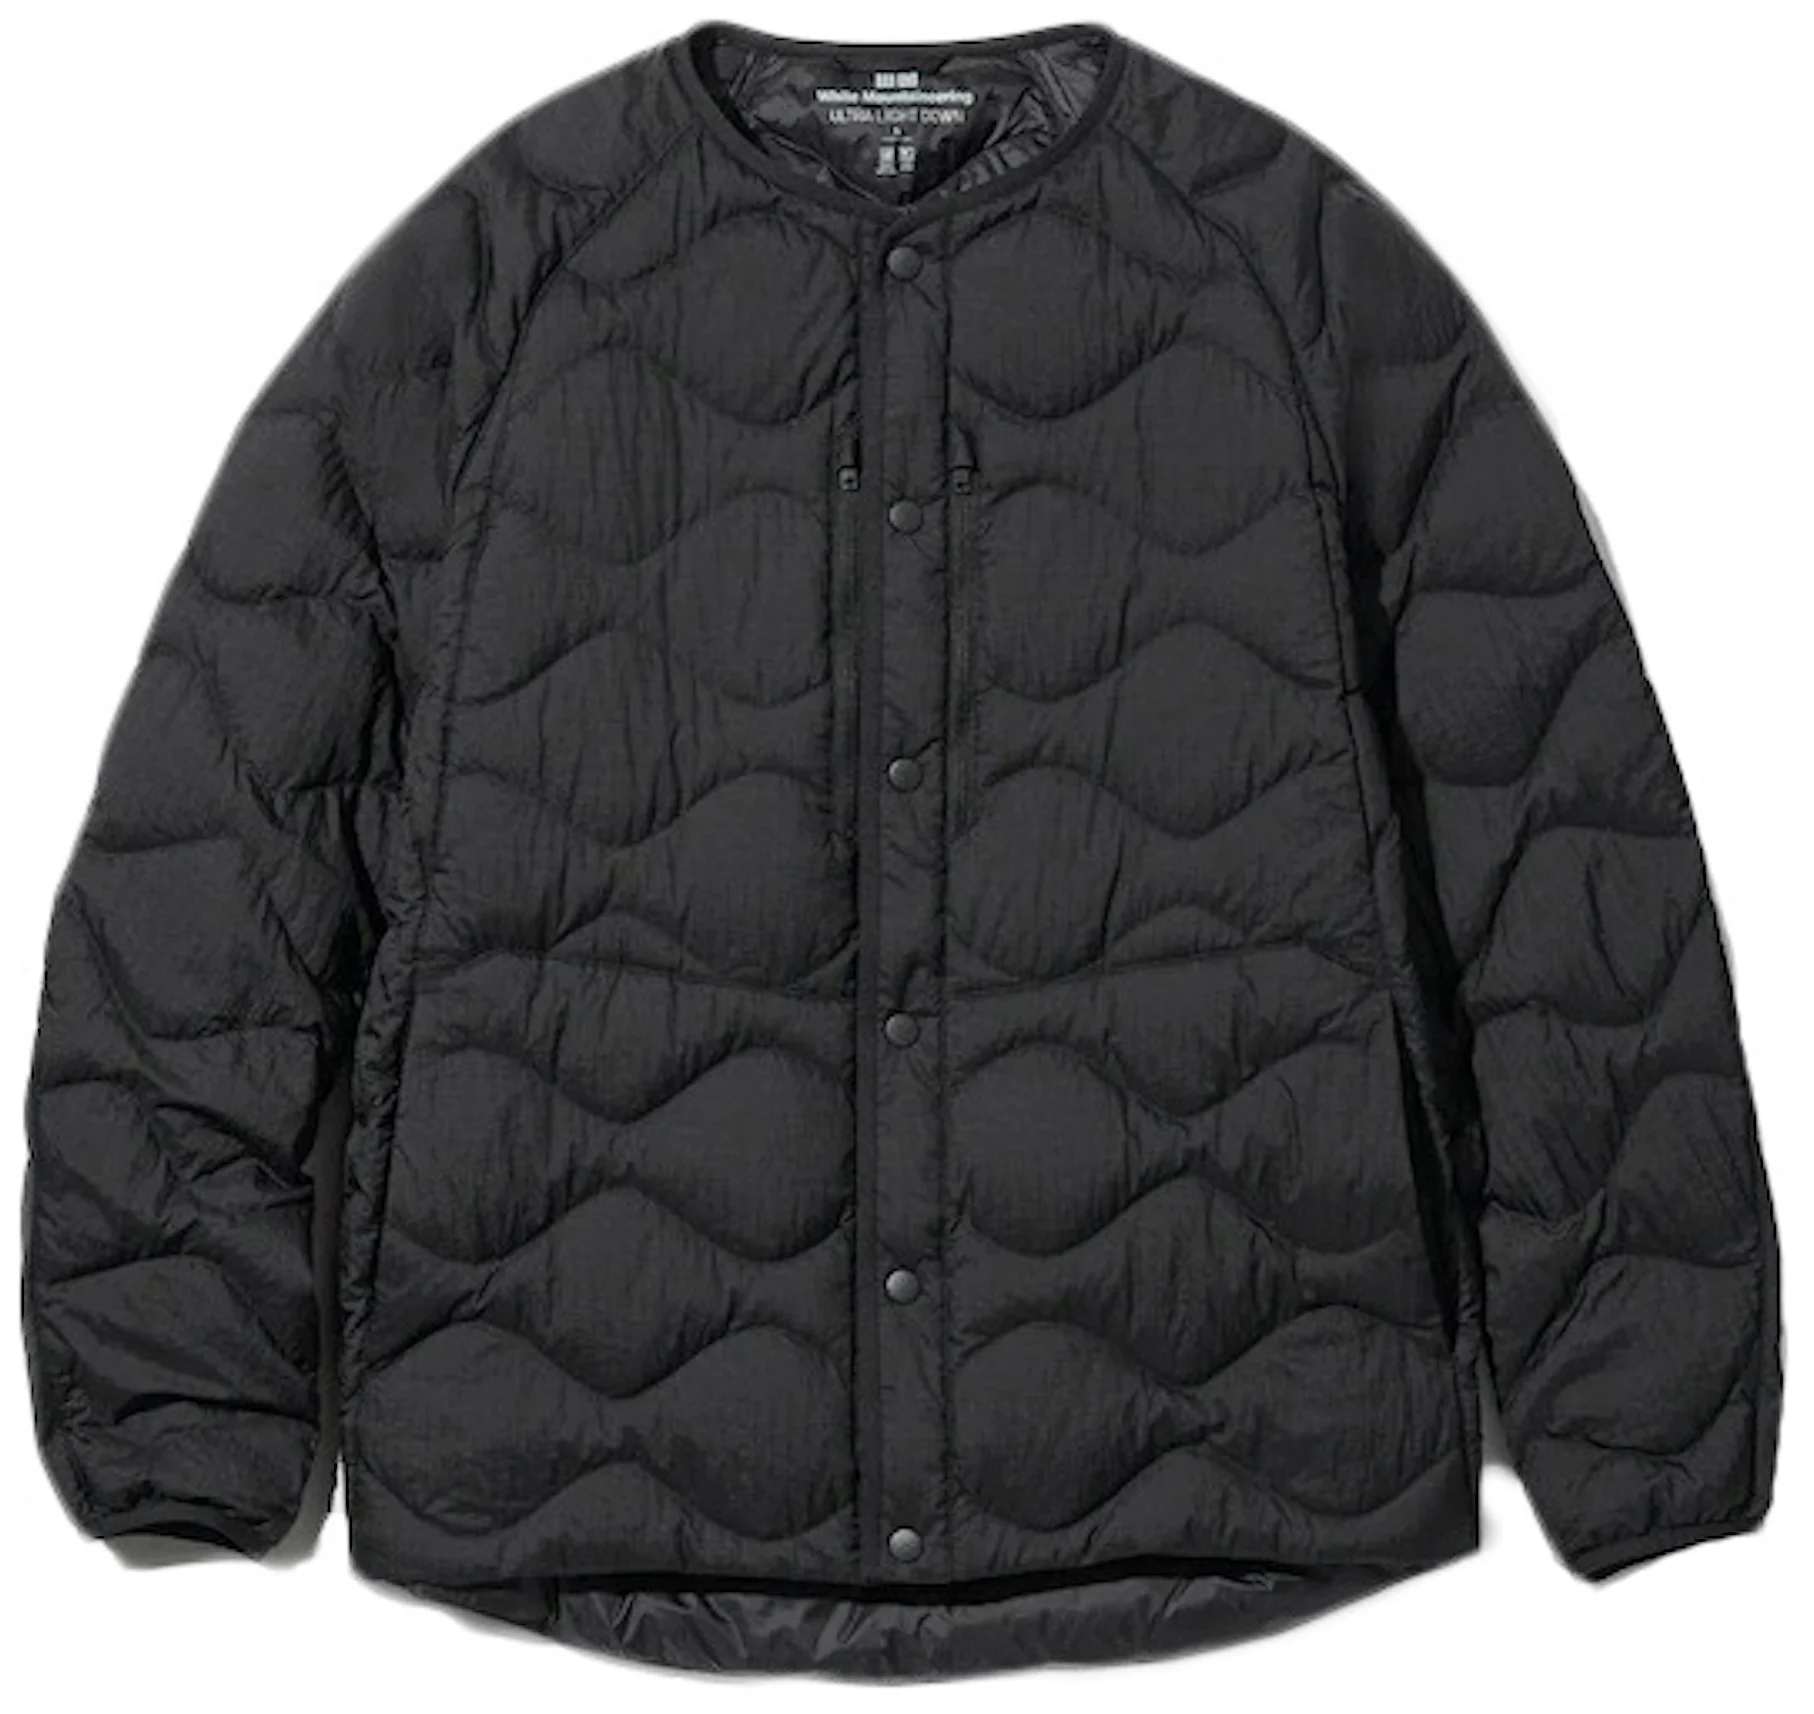 https://images.stockx.com/images/Uniqlo-x-White-Mountaineering-Ultra-Light-Down-Oversized-Jacket-Asia-Sizing-Black.jpg?fit=fill&bg=FFFFFF&w=1200&h=857&fm=webp&auto=compress&dpr=2&trim=color&updated_at=1637814719&q=60